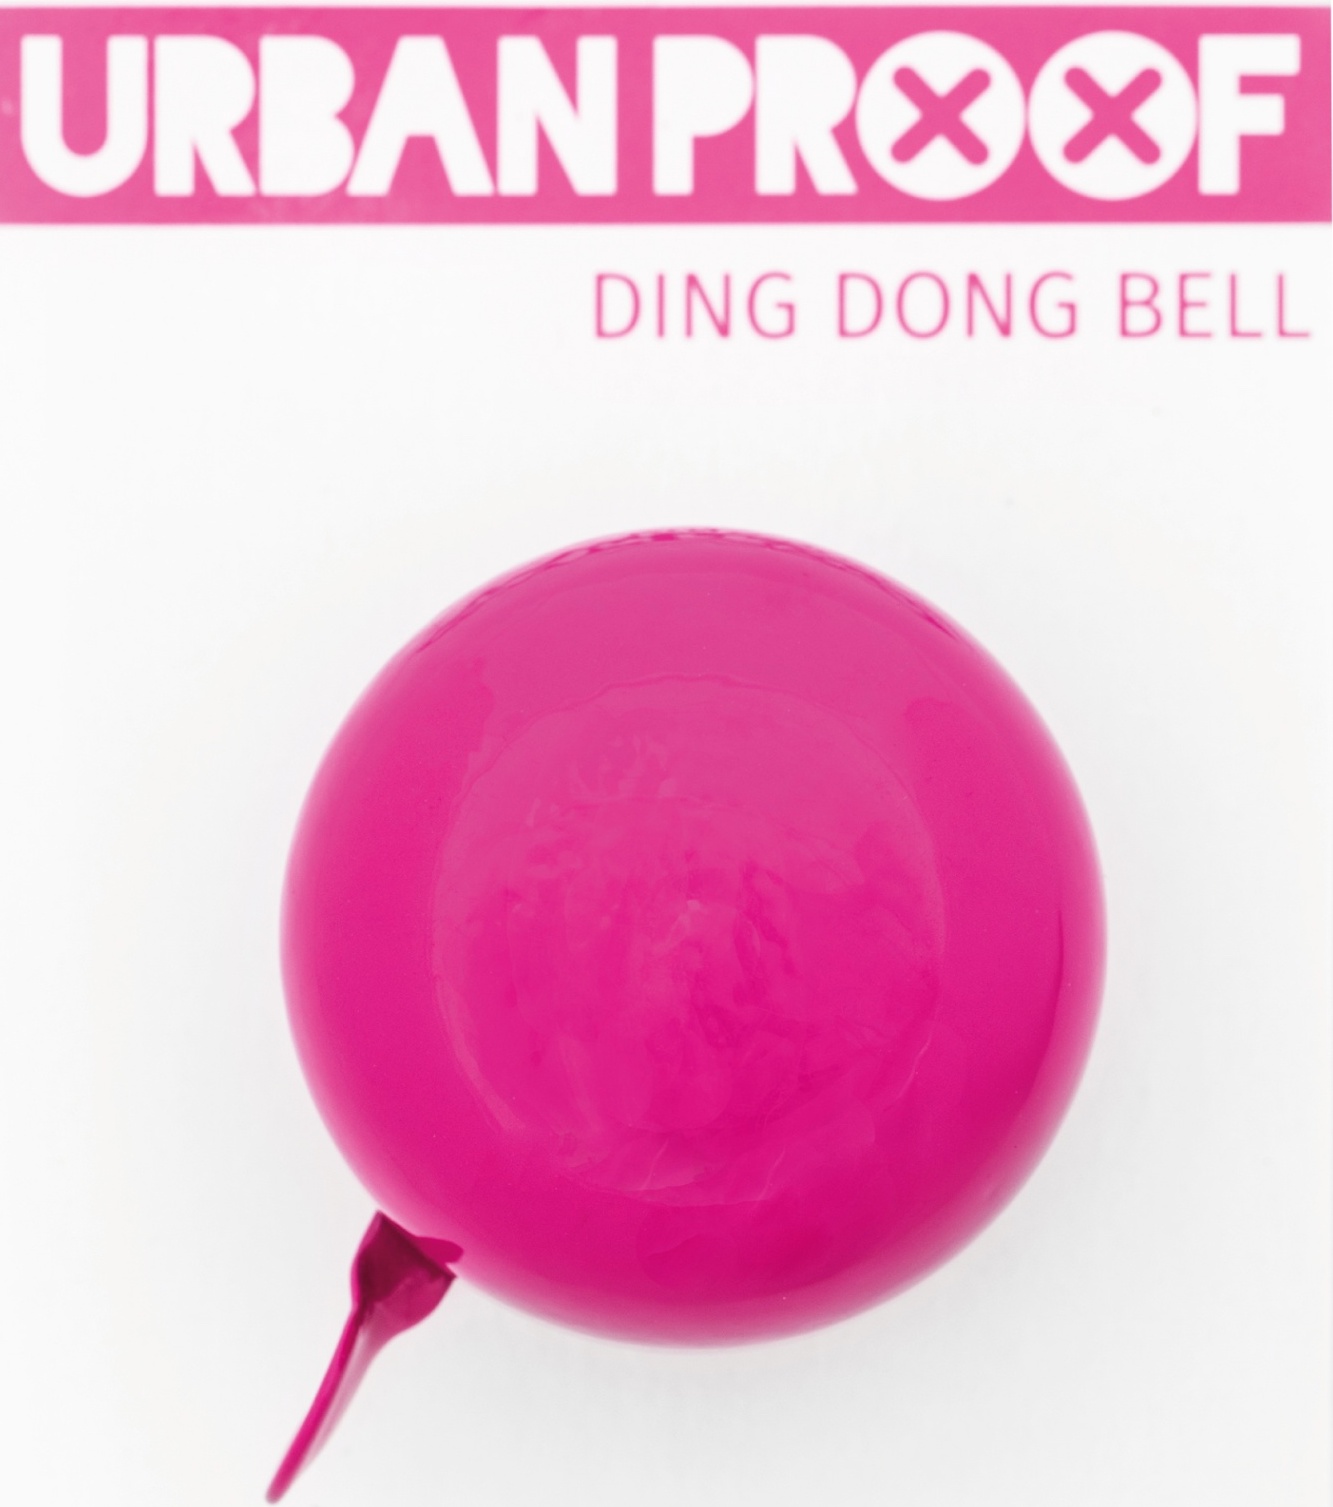 Ding Dong Bell Urban Proof Rose